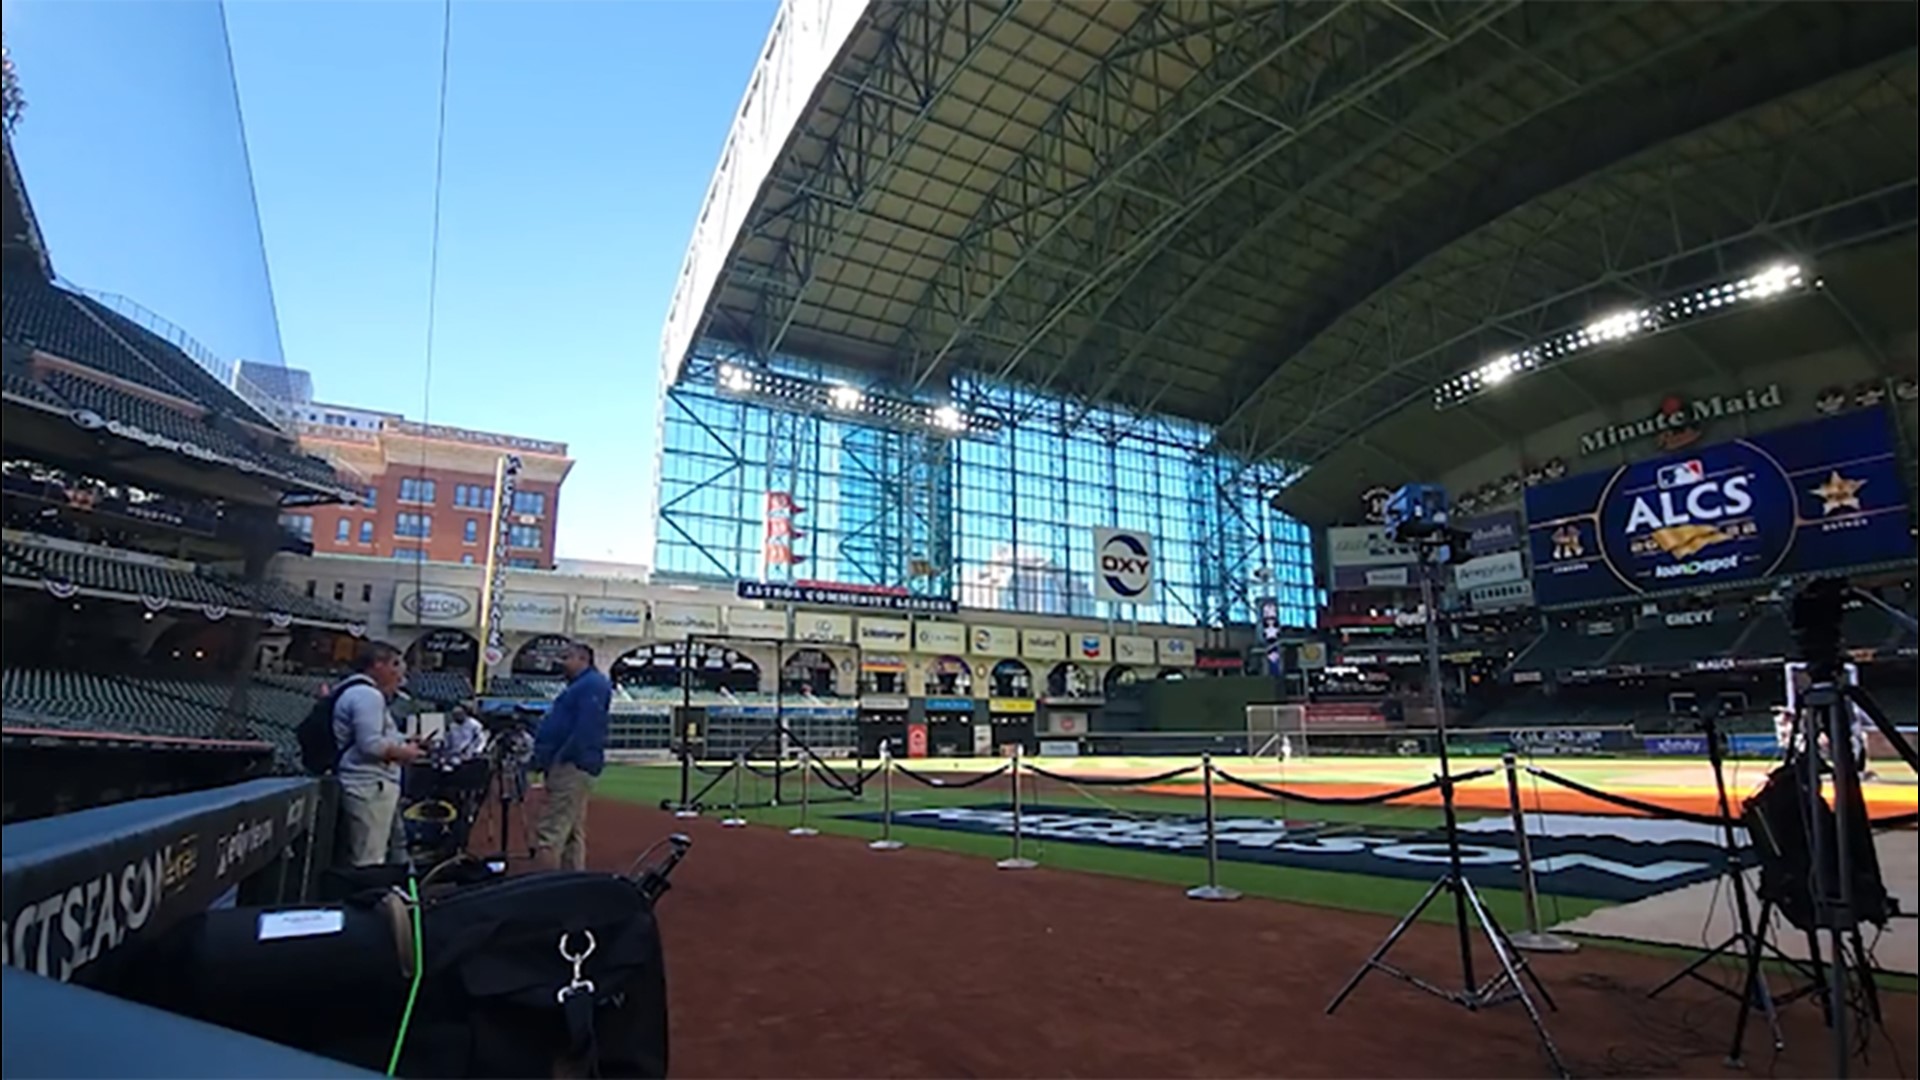 This time-lapse video shows the Minute Maid Park roof closing ahead of Game 1 of the 2022 ALCS between the Astros and Yankees.